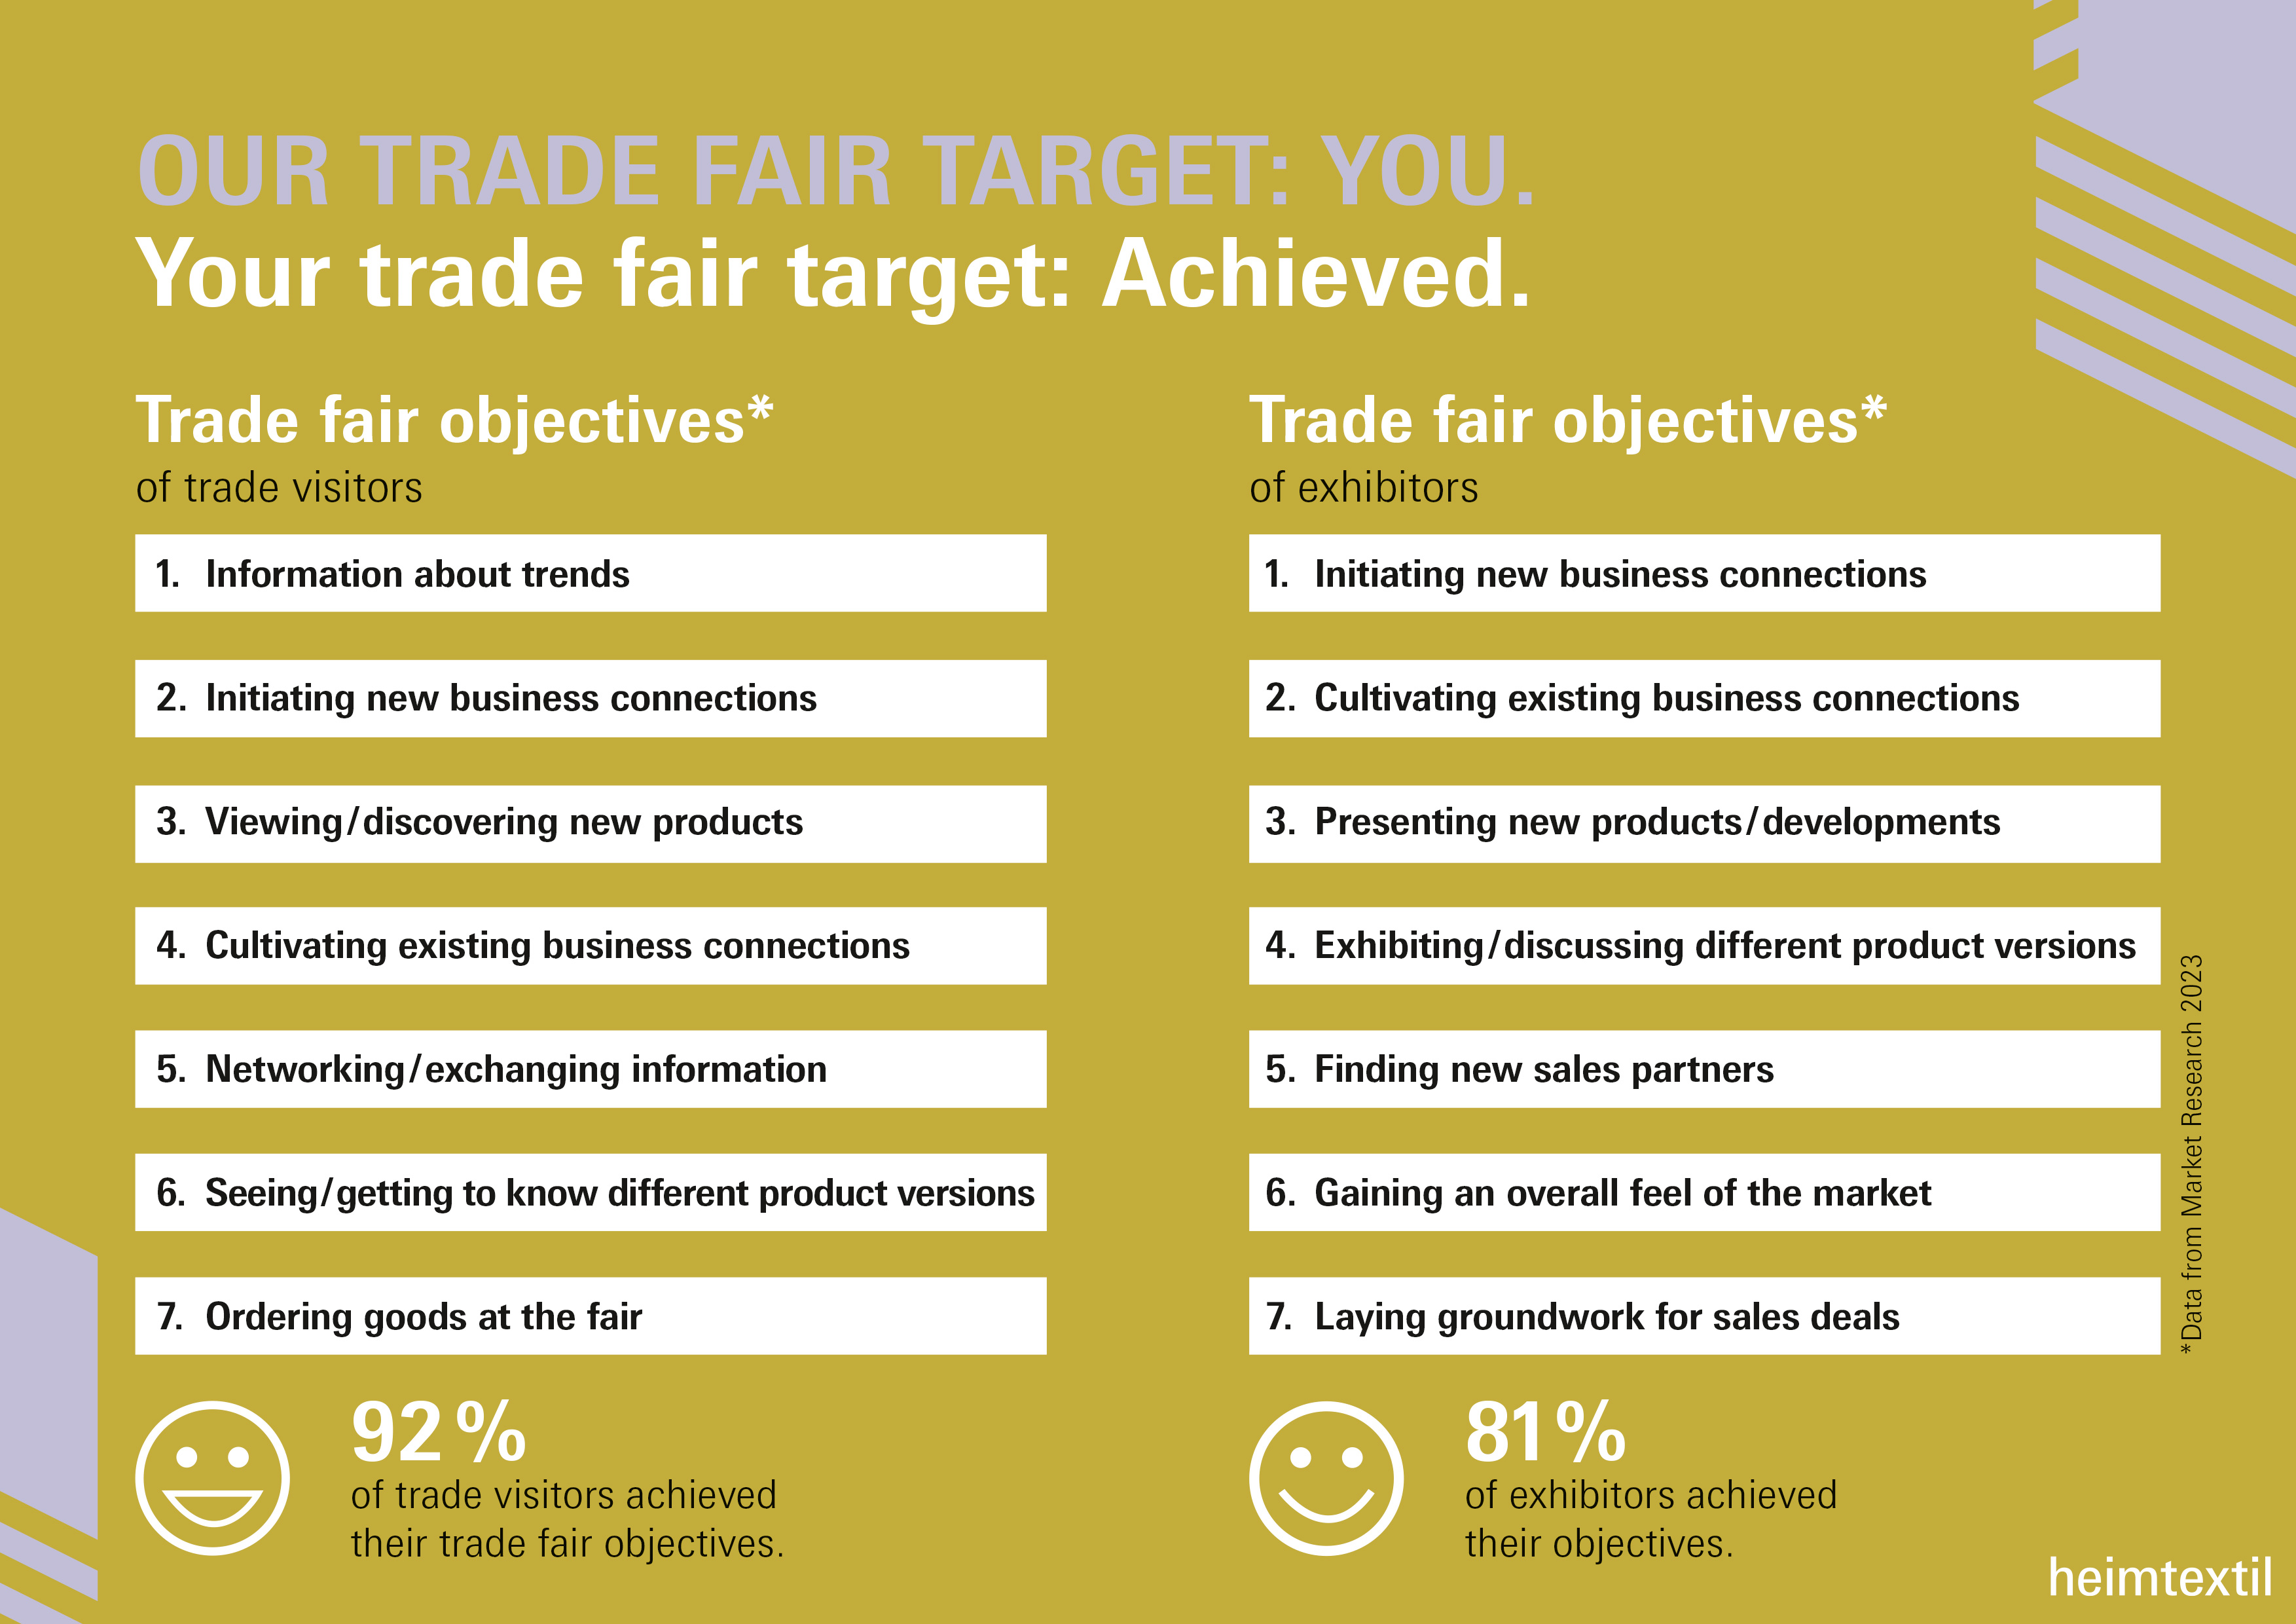 Your trade fair target: Achieved.